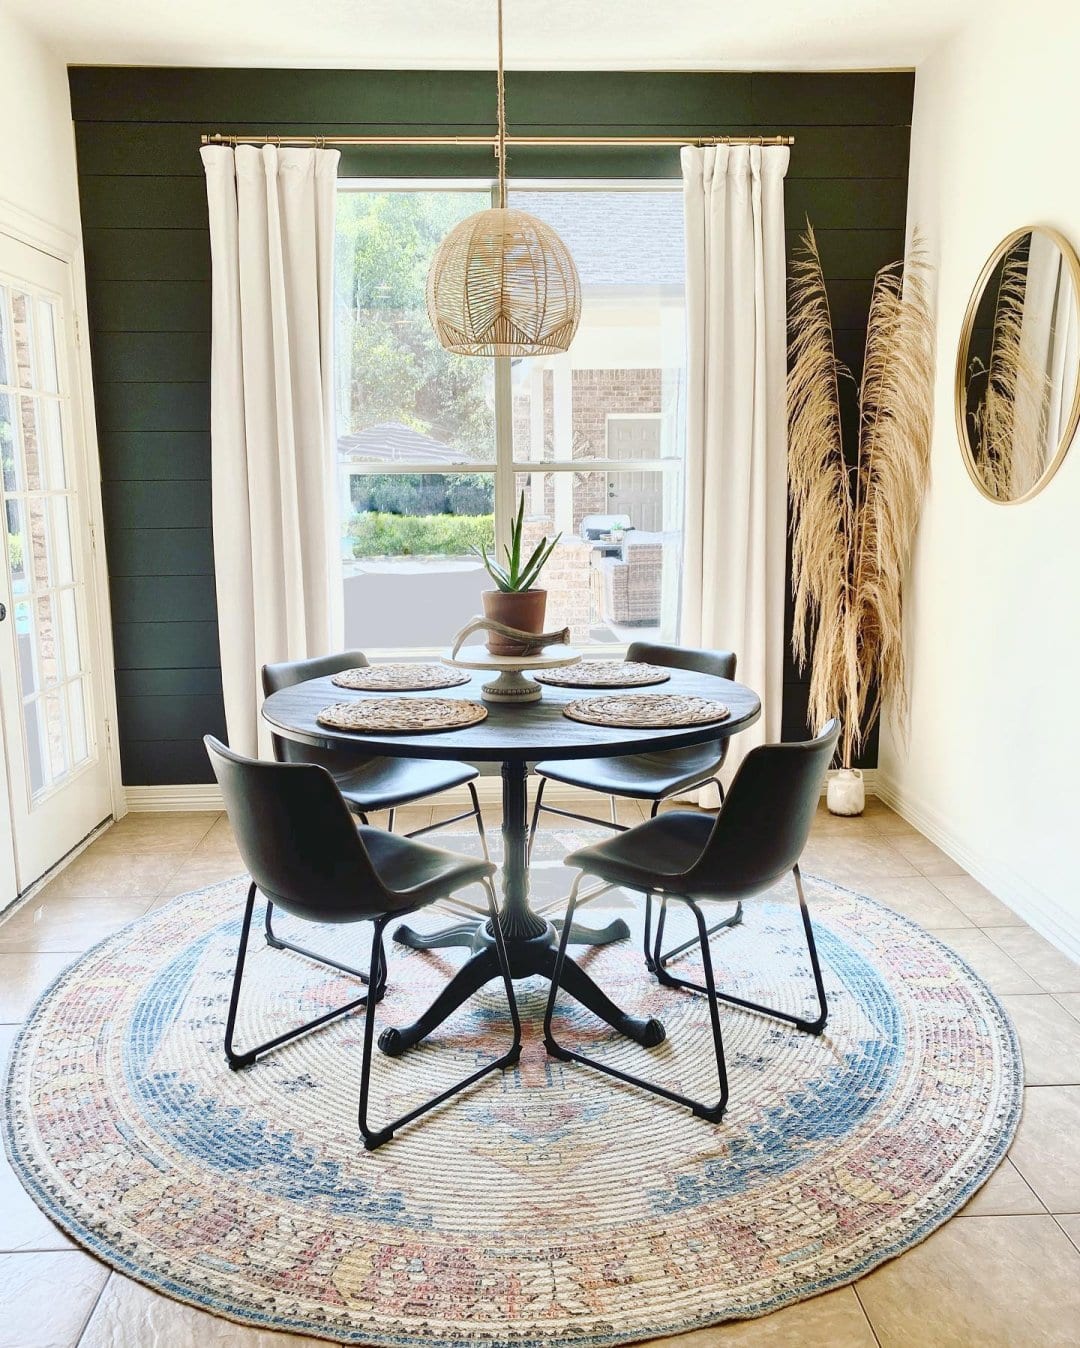 How To Decorate A Round Dining Table, How To Set Up A Round Dining Table